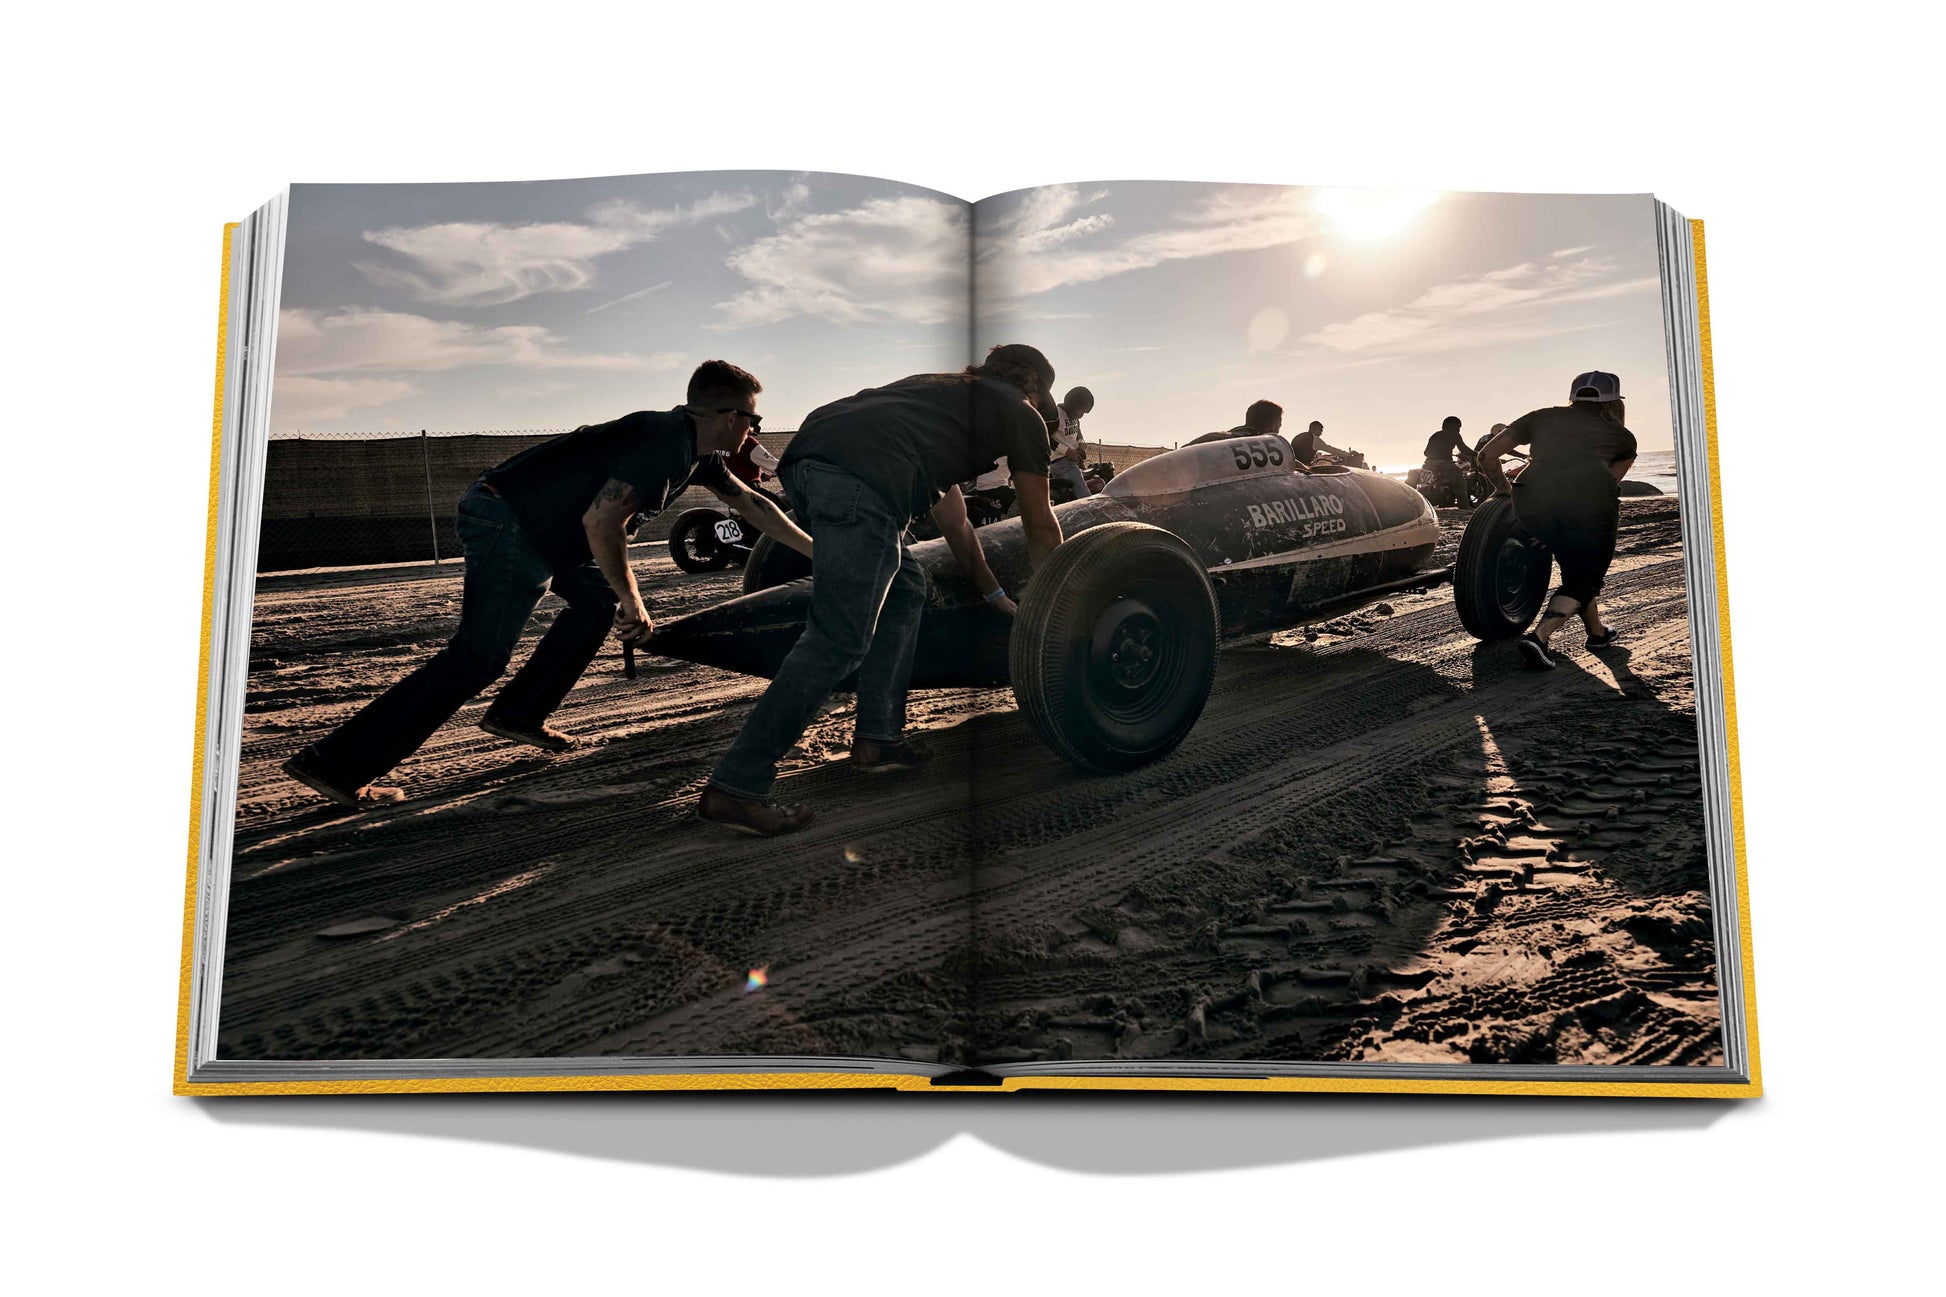 A team of individuals pushing a vintage race car on a sandy surface, captured in a photograph within an open book at The Race of Gentlemen by Assouline.